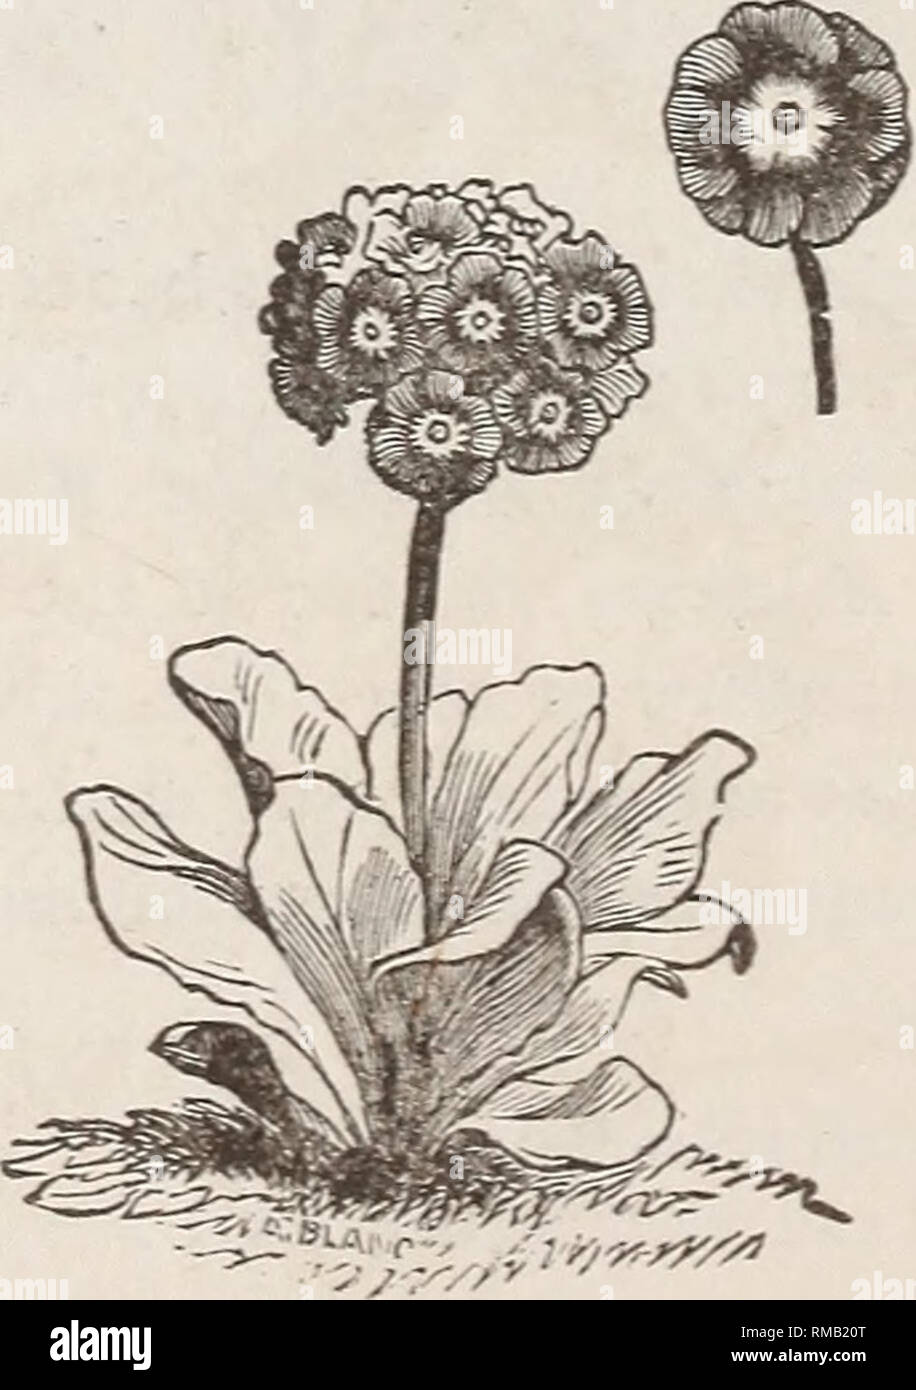 . Annual descriptive catalogue of seeds, &amp; c : February 1st, 1886. Nursery stock Massachusetts Catalogs; Seeds Catalogs; Flowers Seeds Catalogs; Vegetables Seeds Catalogs; Gardening Catalogs. A showy border plant with red and white flowers. Grows very readily from seed ; height about eighteen inches. Coronaria, red, — alba, white, ALLIUM. This is a showy class of bulbous-rooted plants, quite hardy and easily raised from seed. Pkt. Azureum, very shoy heads of azure-blue flowers, .10 Neapolitanum, pure white, very fine, . . .10 ARABIS. An early Spring-flowering plant, indispen- sable for r Stock Photo